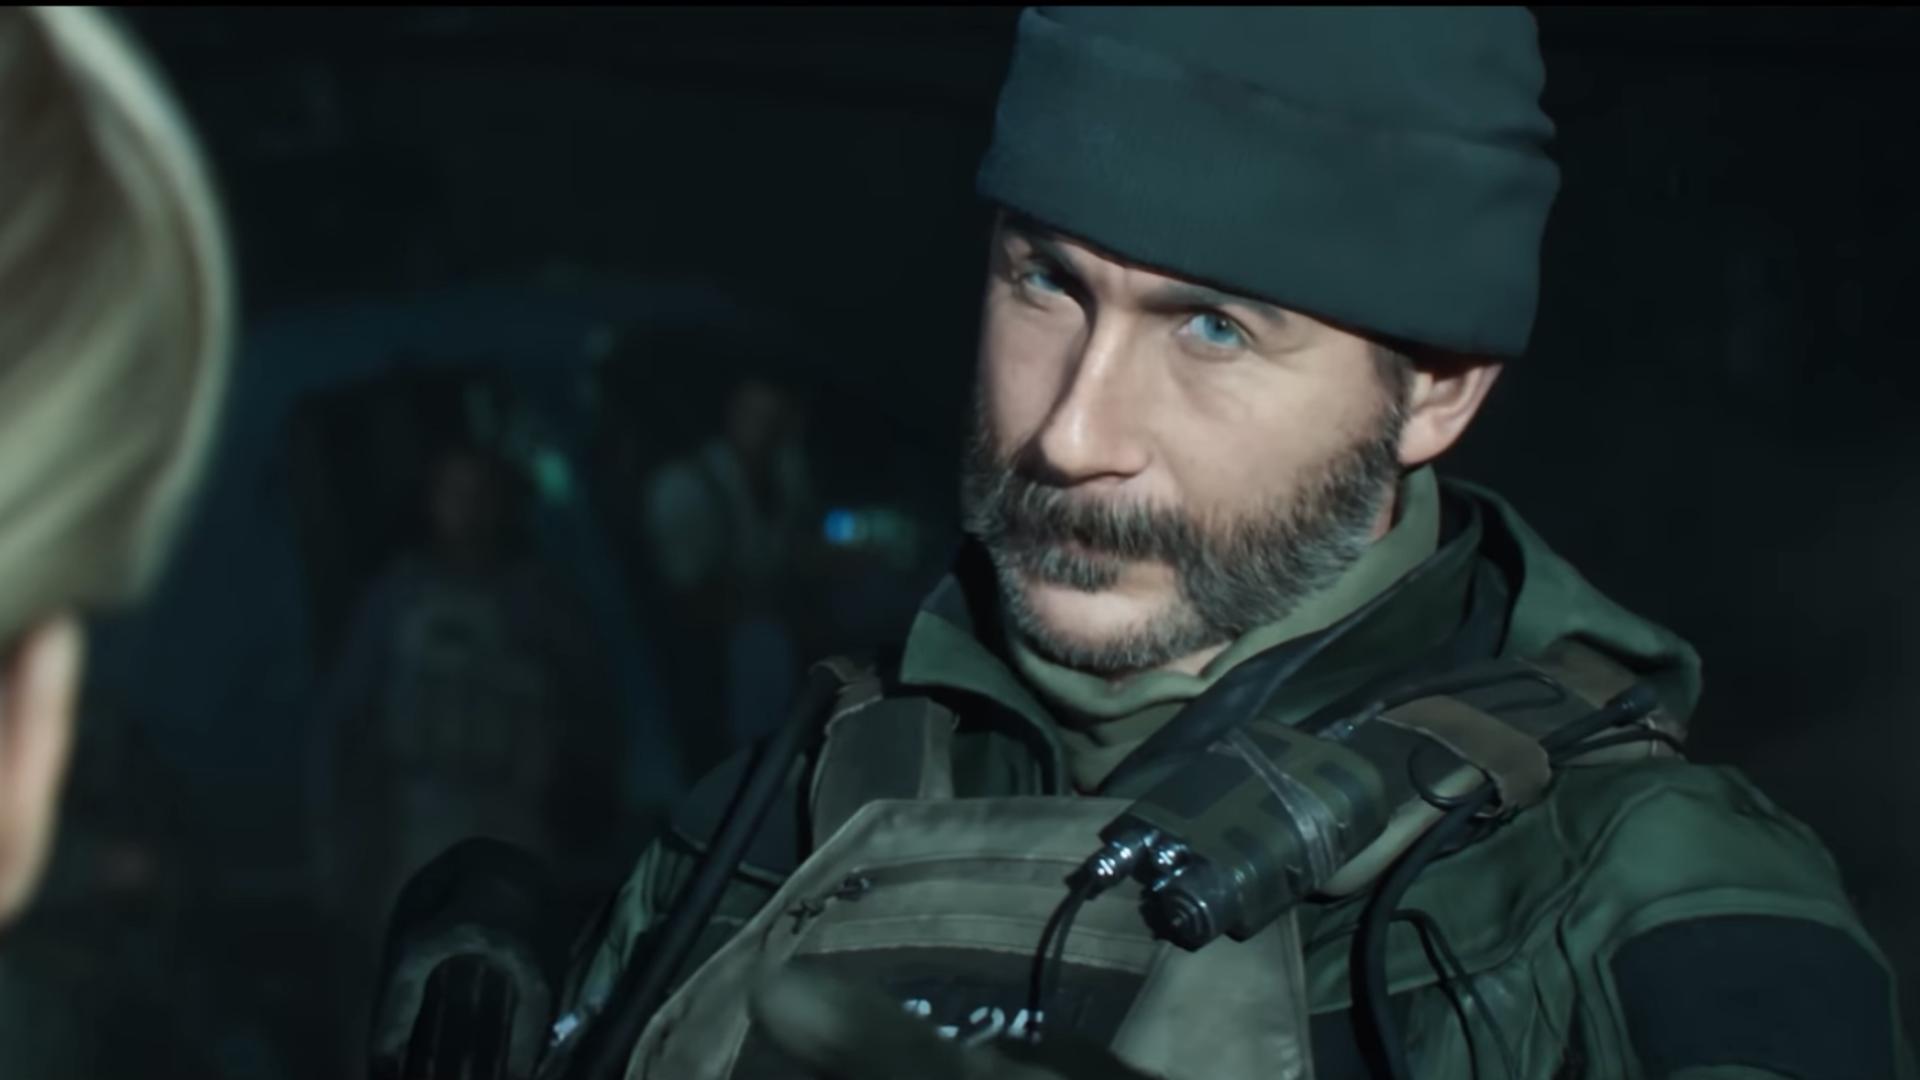 Call of Duty 2022 will reportedly feature the original actor for